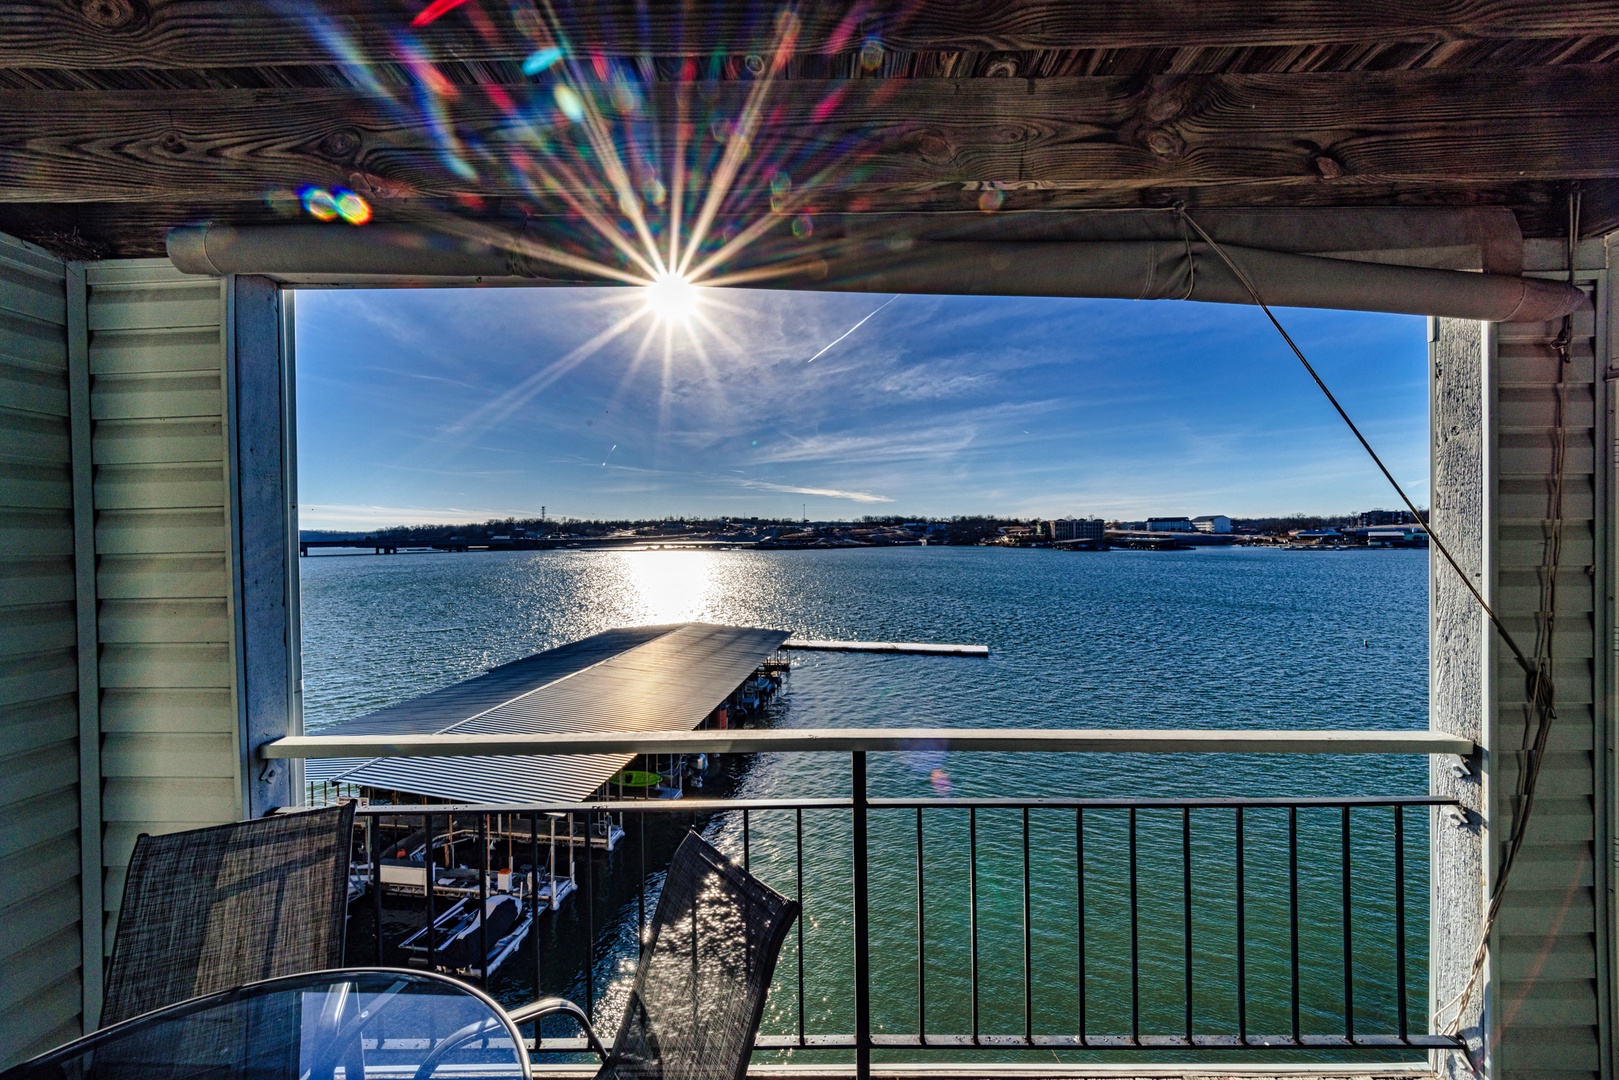 Savor the mesmerizing lake views while nestled in the comfort of the deck